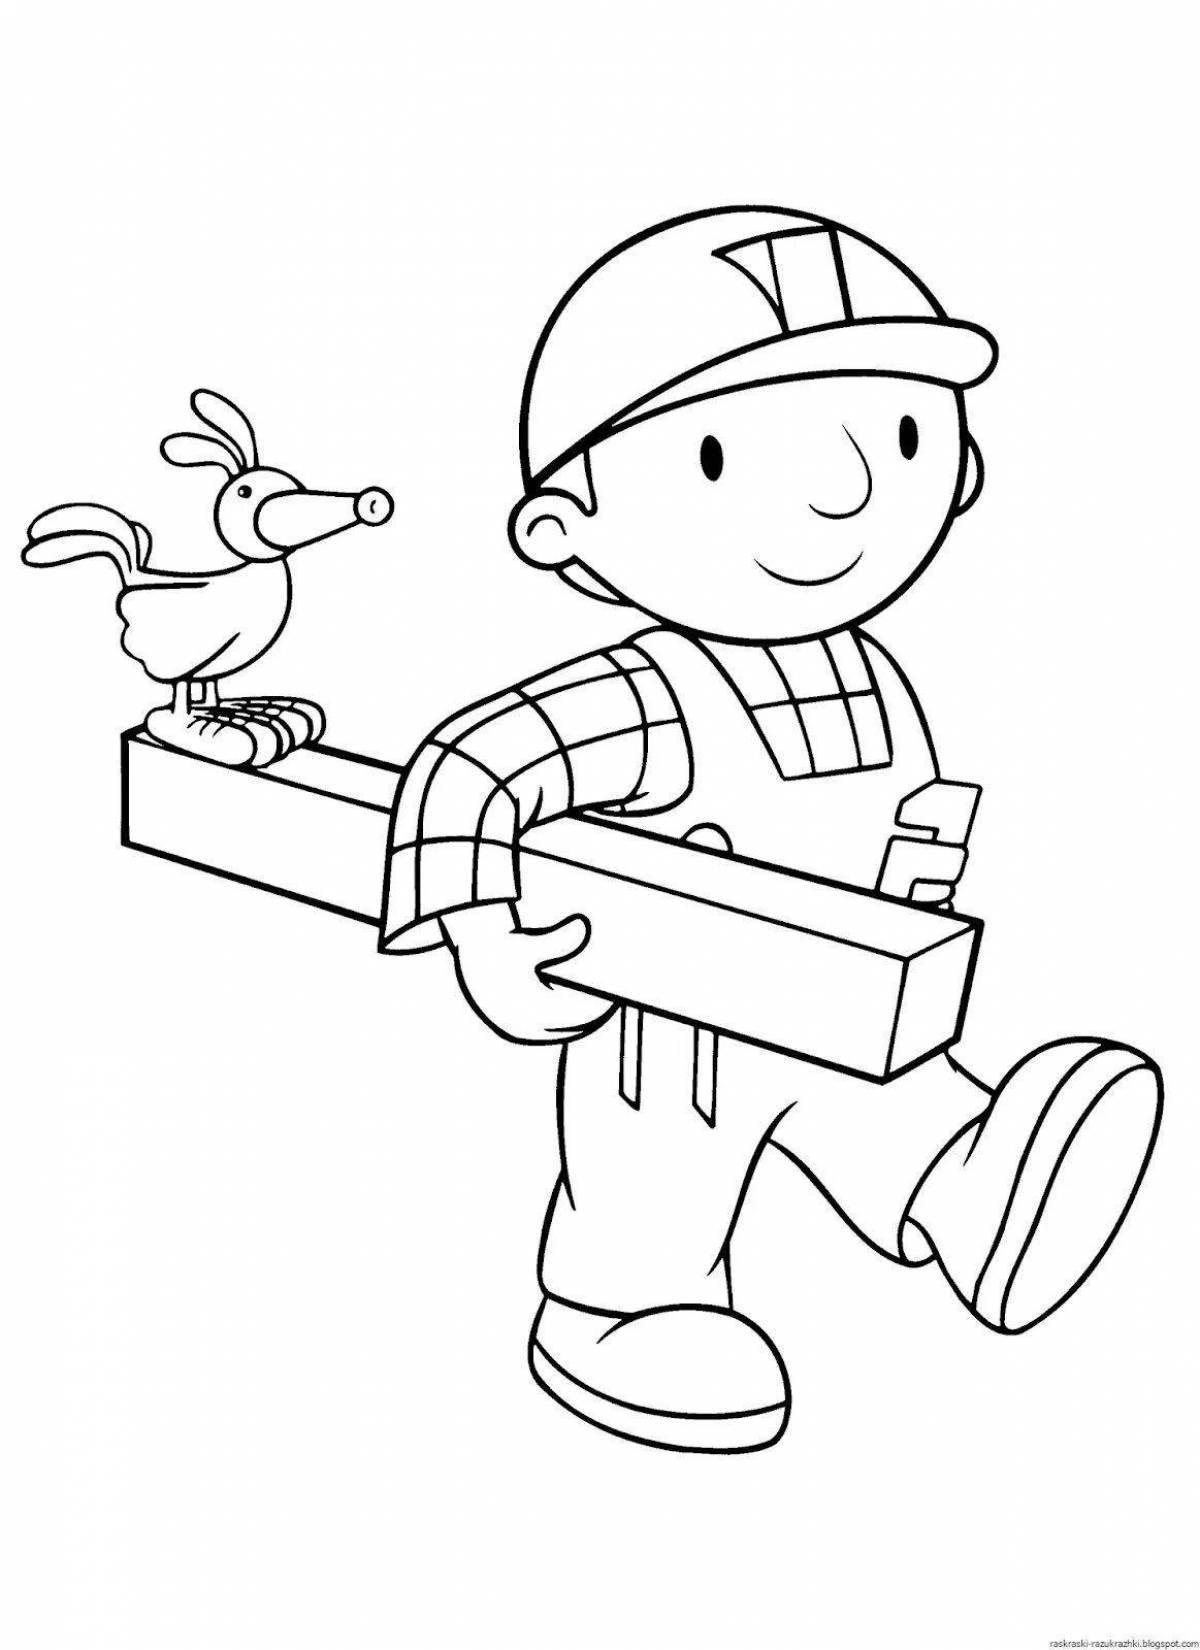 Delightful occupational safety through the eyes of children for preschoolers